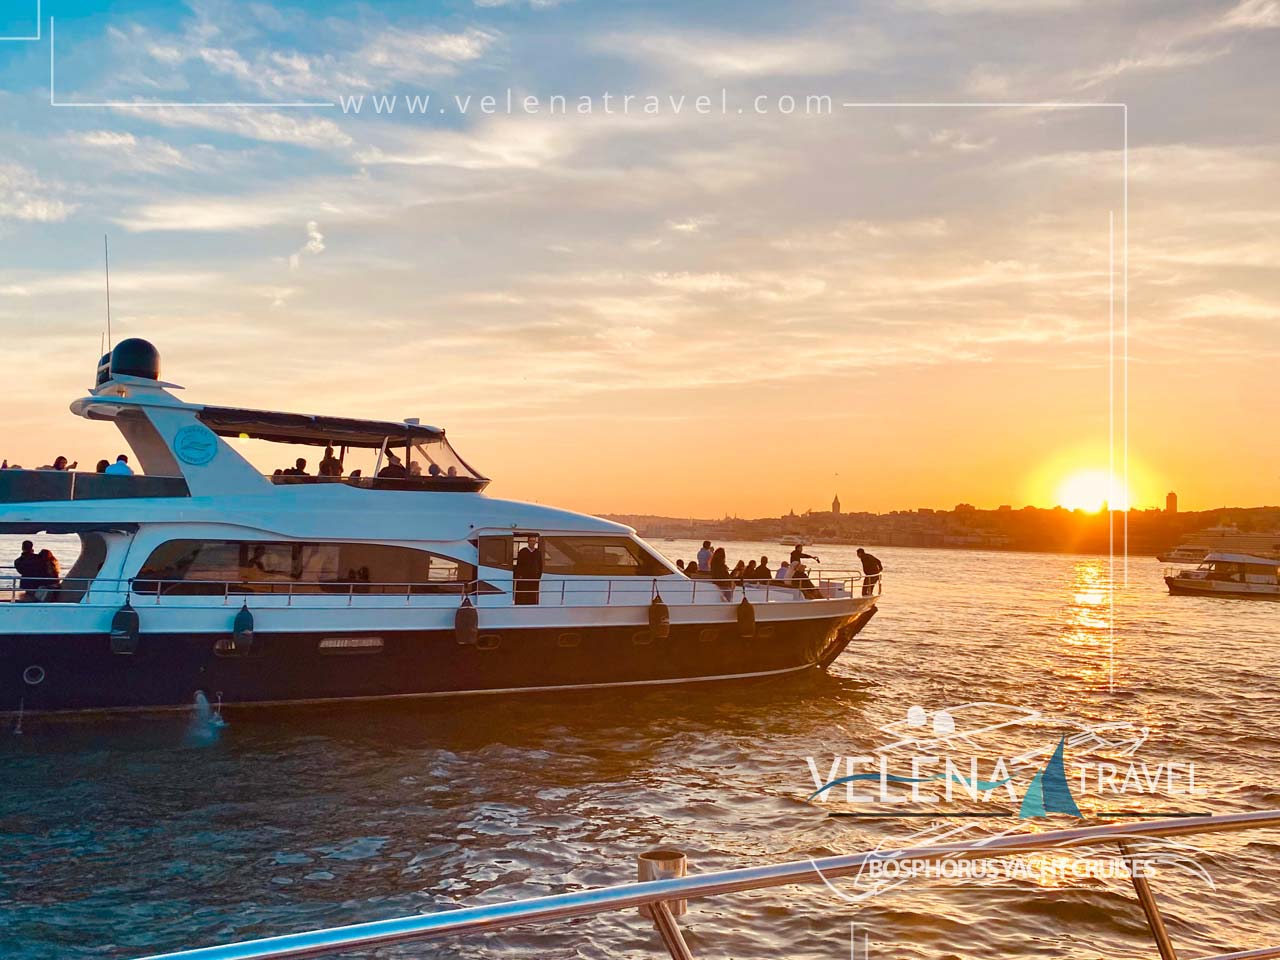 Istanbul Bosphorus Sunset Cruise on a Private Yacht